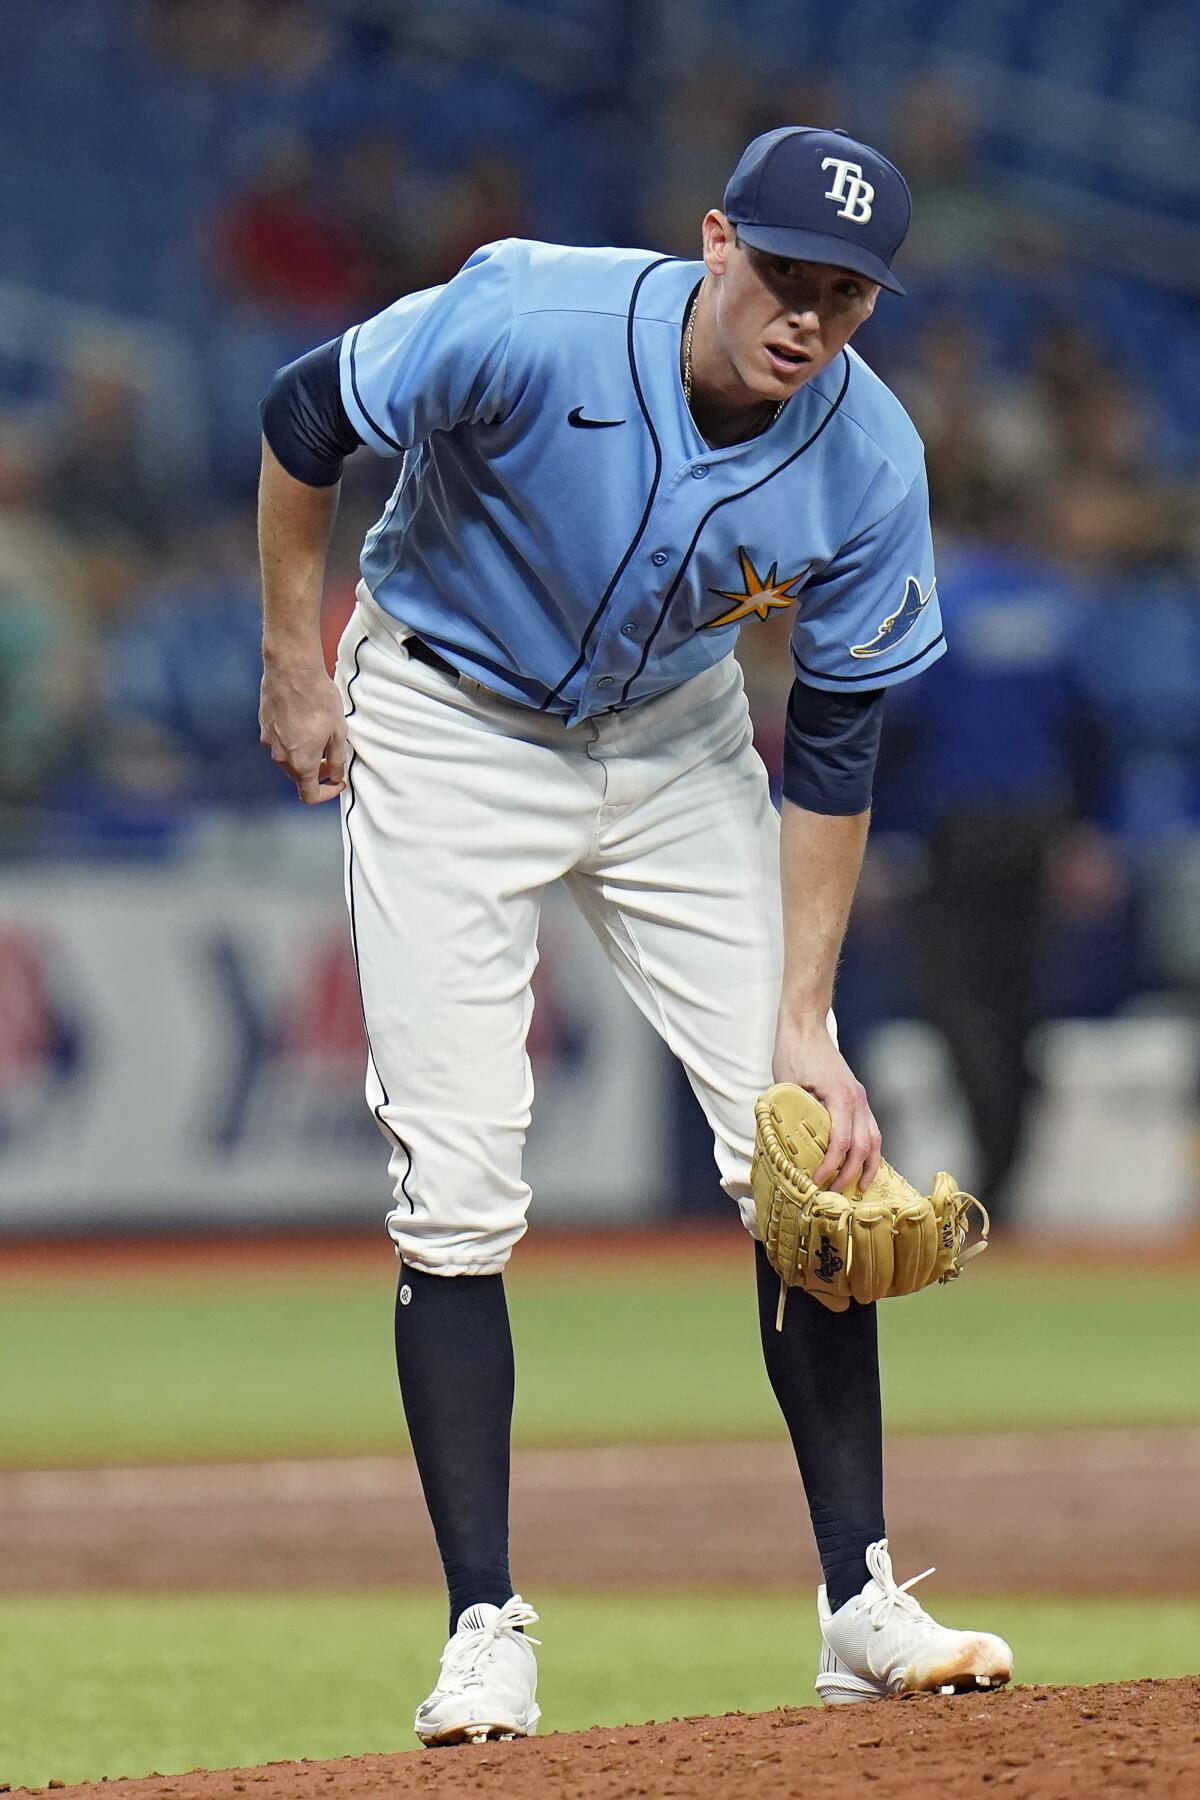 Wander Franco drives in 3 as Rays beat Blue Jays 10-5 - The San